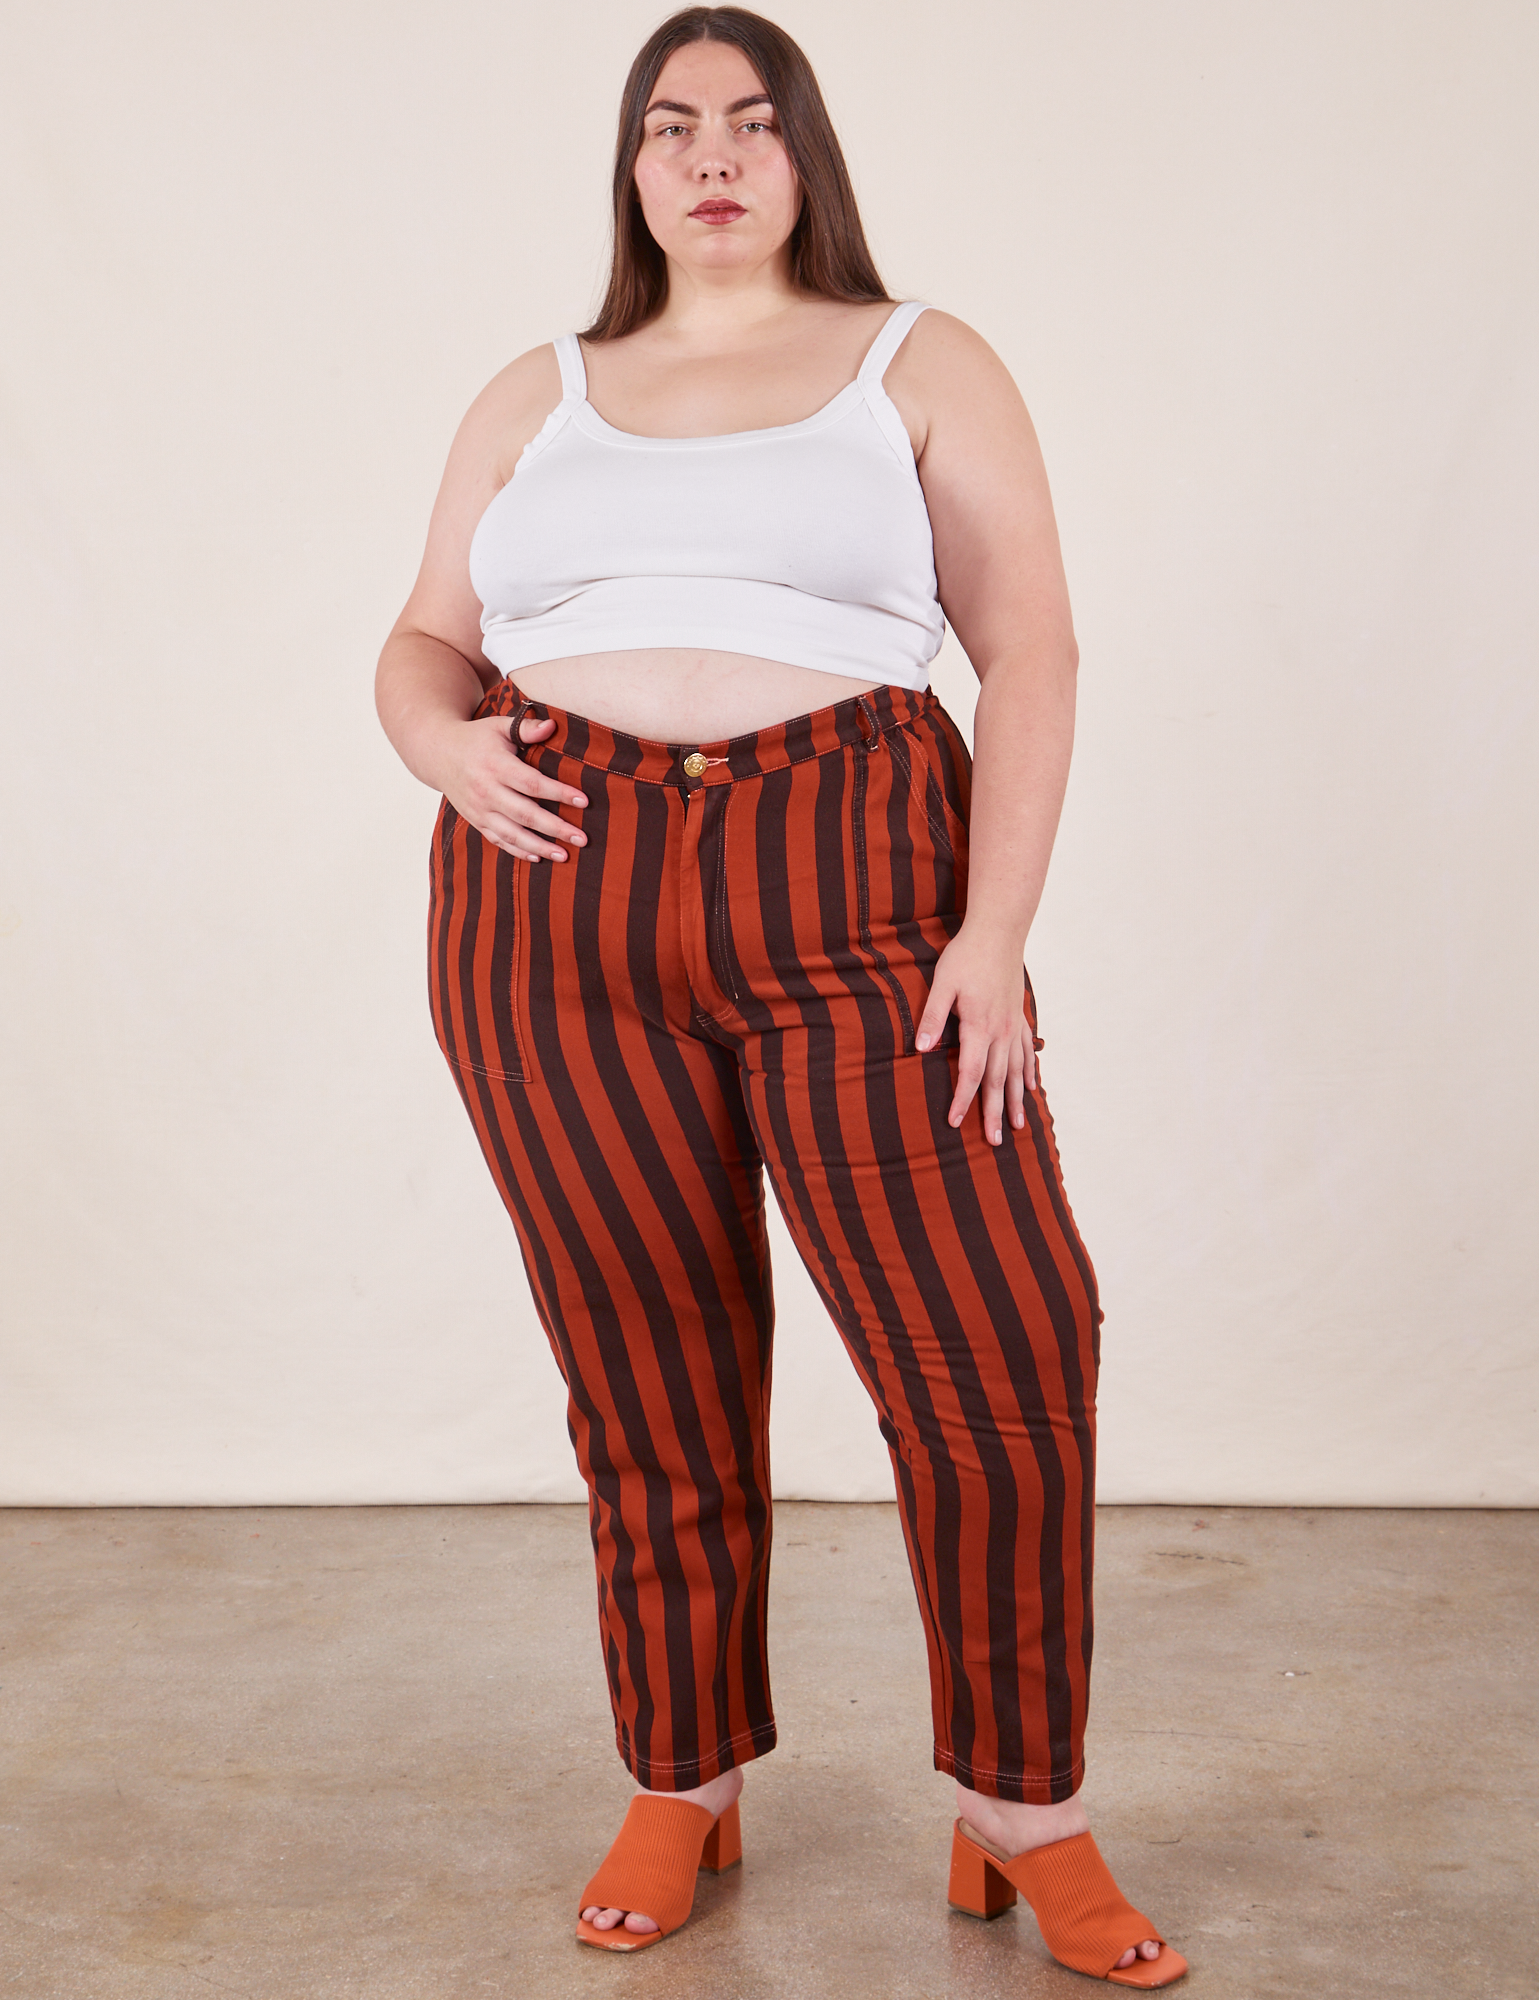 Marielena is 5'8" and wearing 2XL Black Striped Work Pants in Paprika paired with vintage off-white Cropped Cami